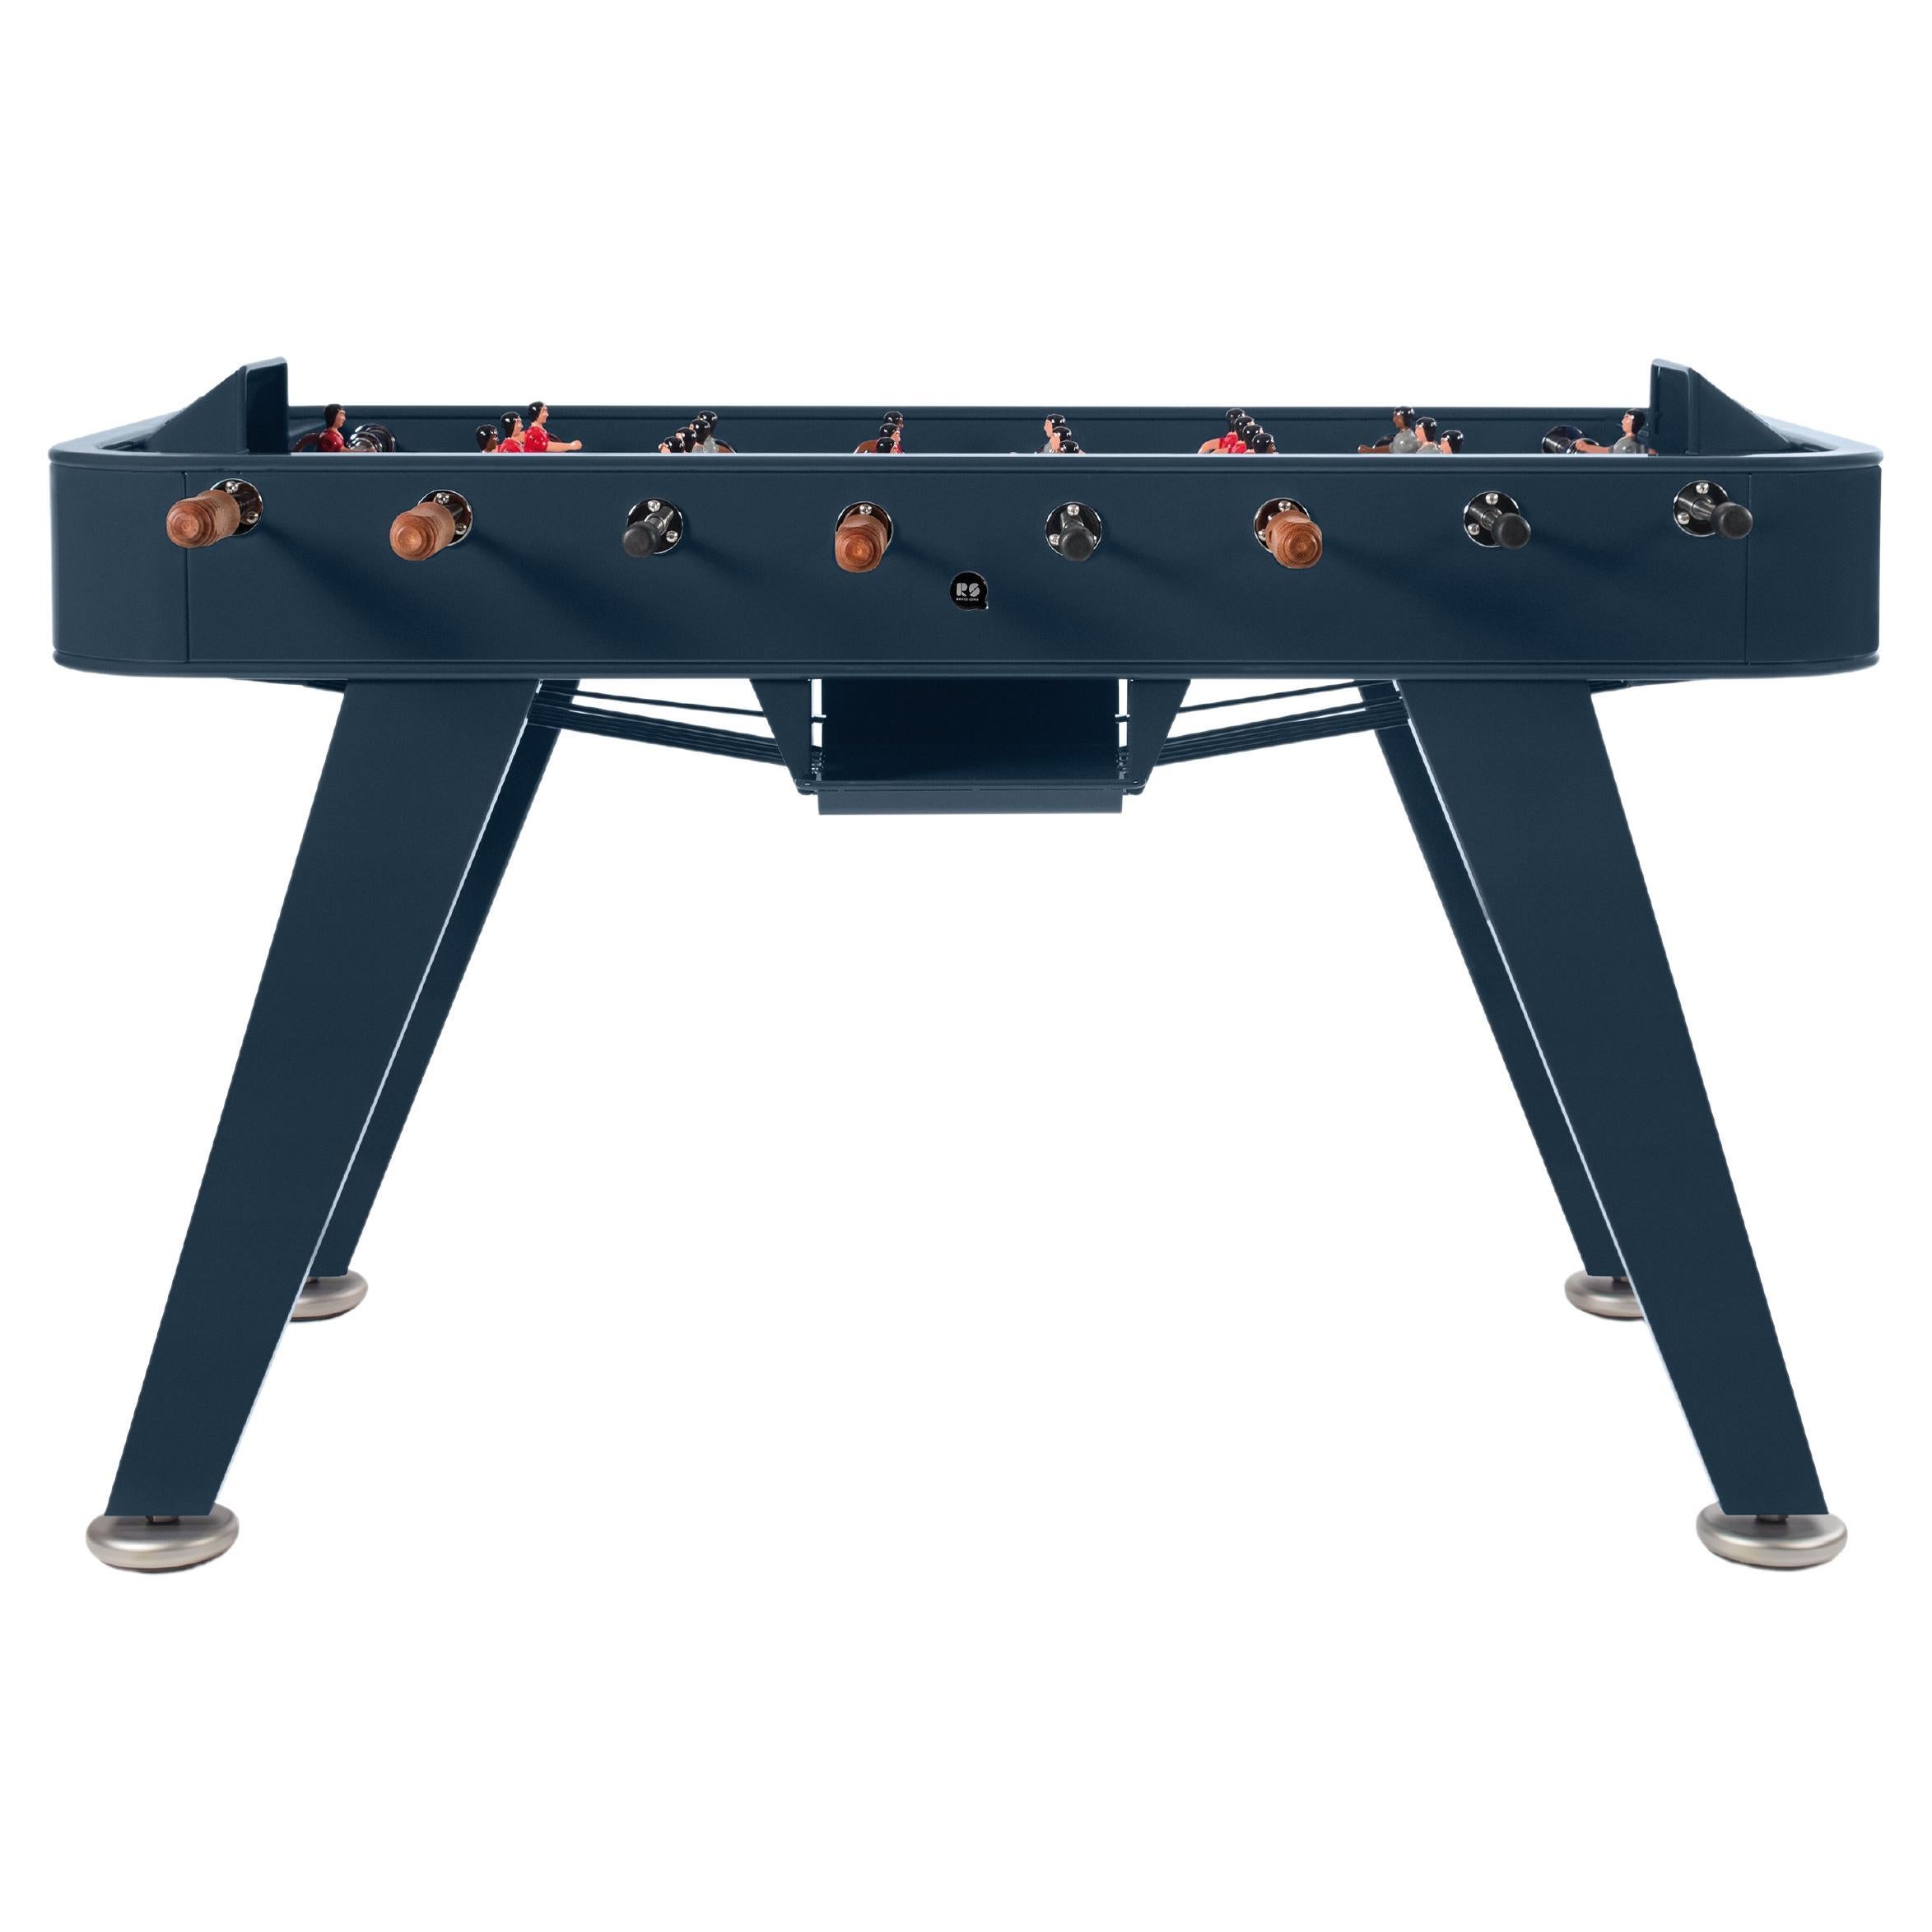 The RS2 football table is a spectacular reinterpretation of one of our cultural classics. It's made with high-quality steel and a polyester paint finish. Outdoor models are made with weather resistant stainless steel. Also designed with rubber-soled